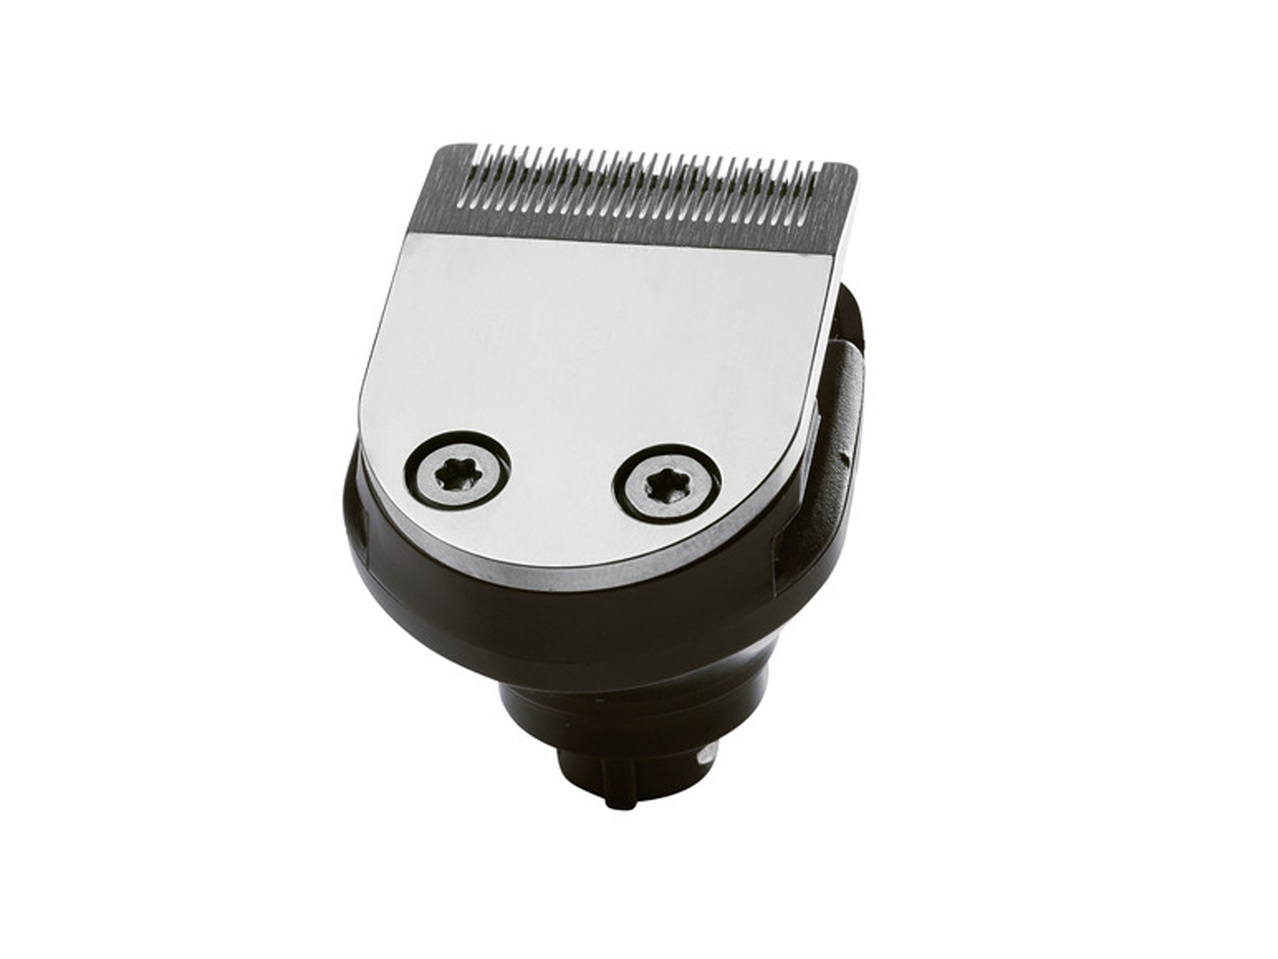 SILVERCREST PERSONAL CARE Rotary Shaver